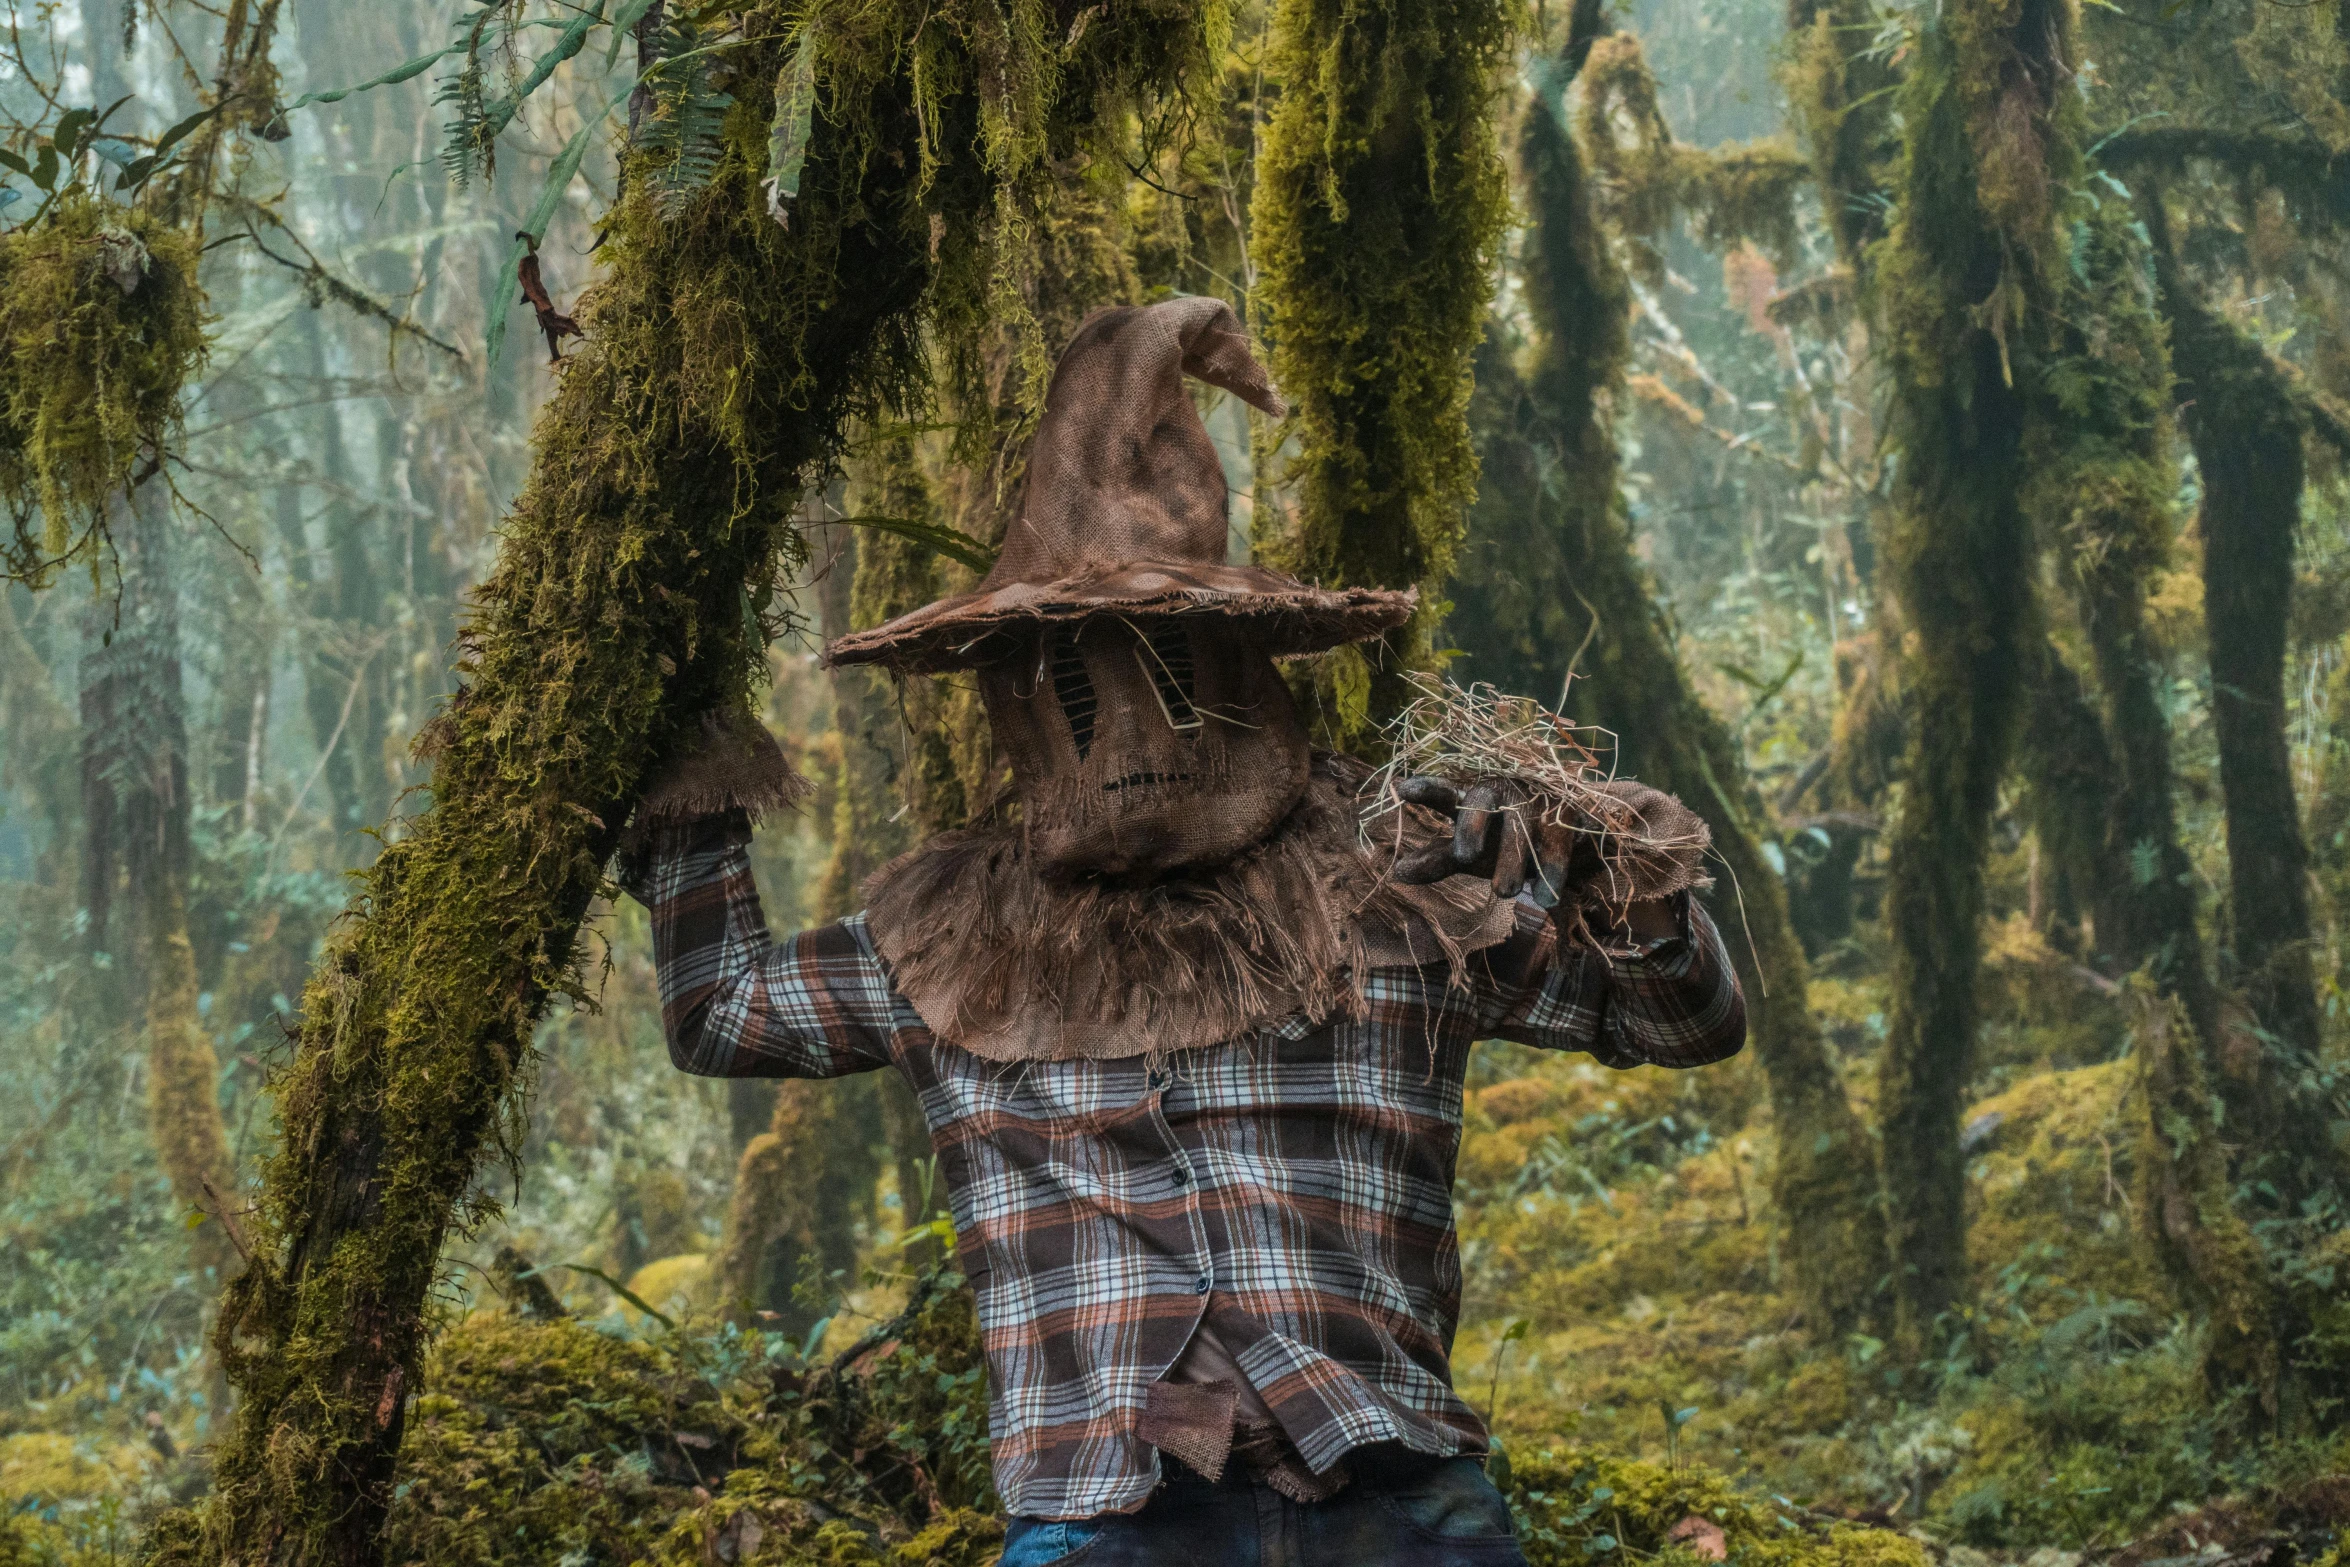 there is a woman dressed as scarecrows in the forest